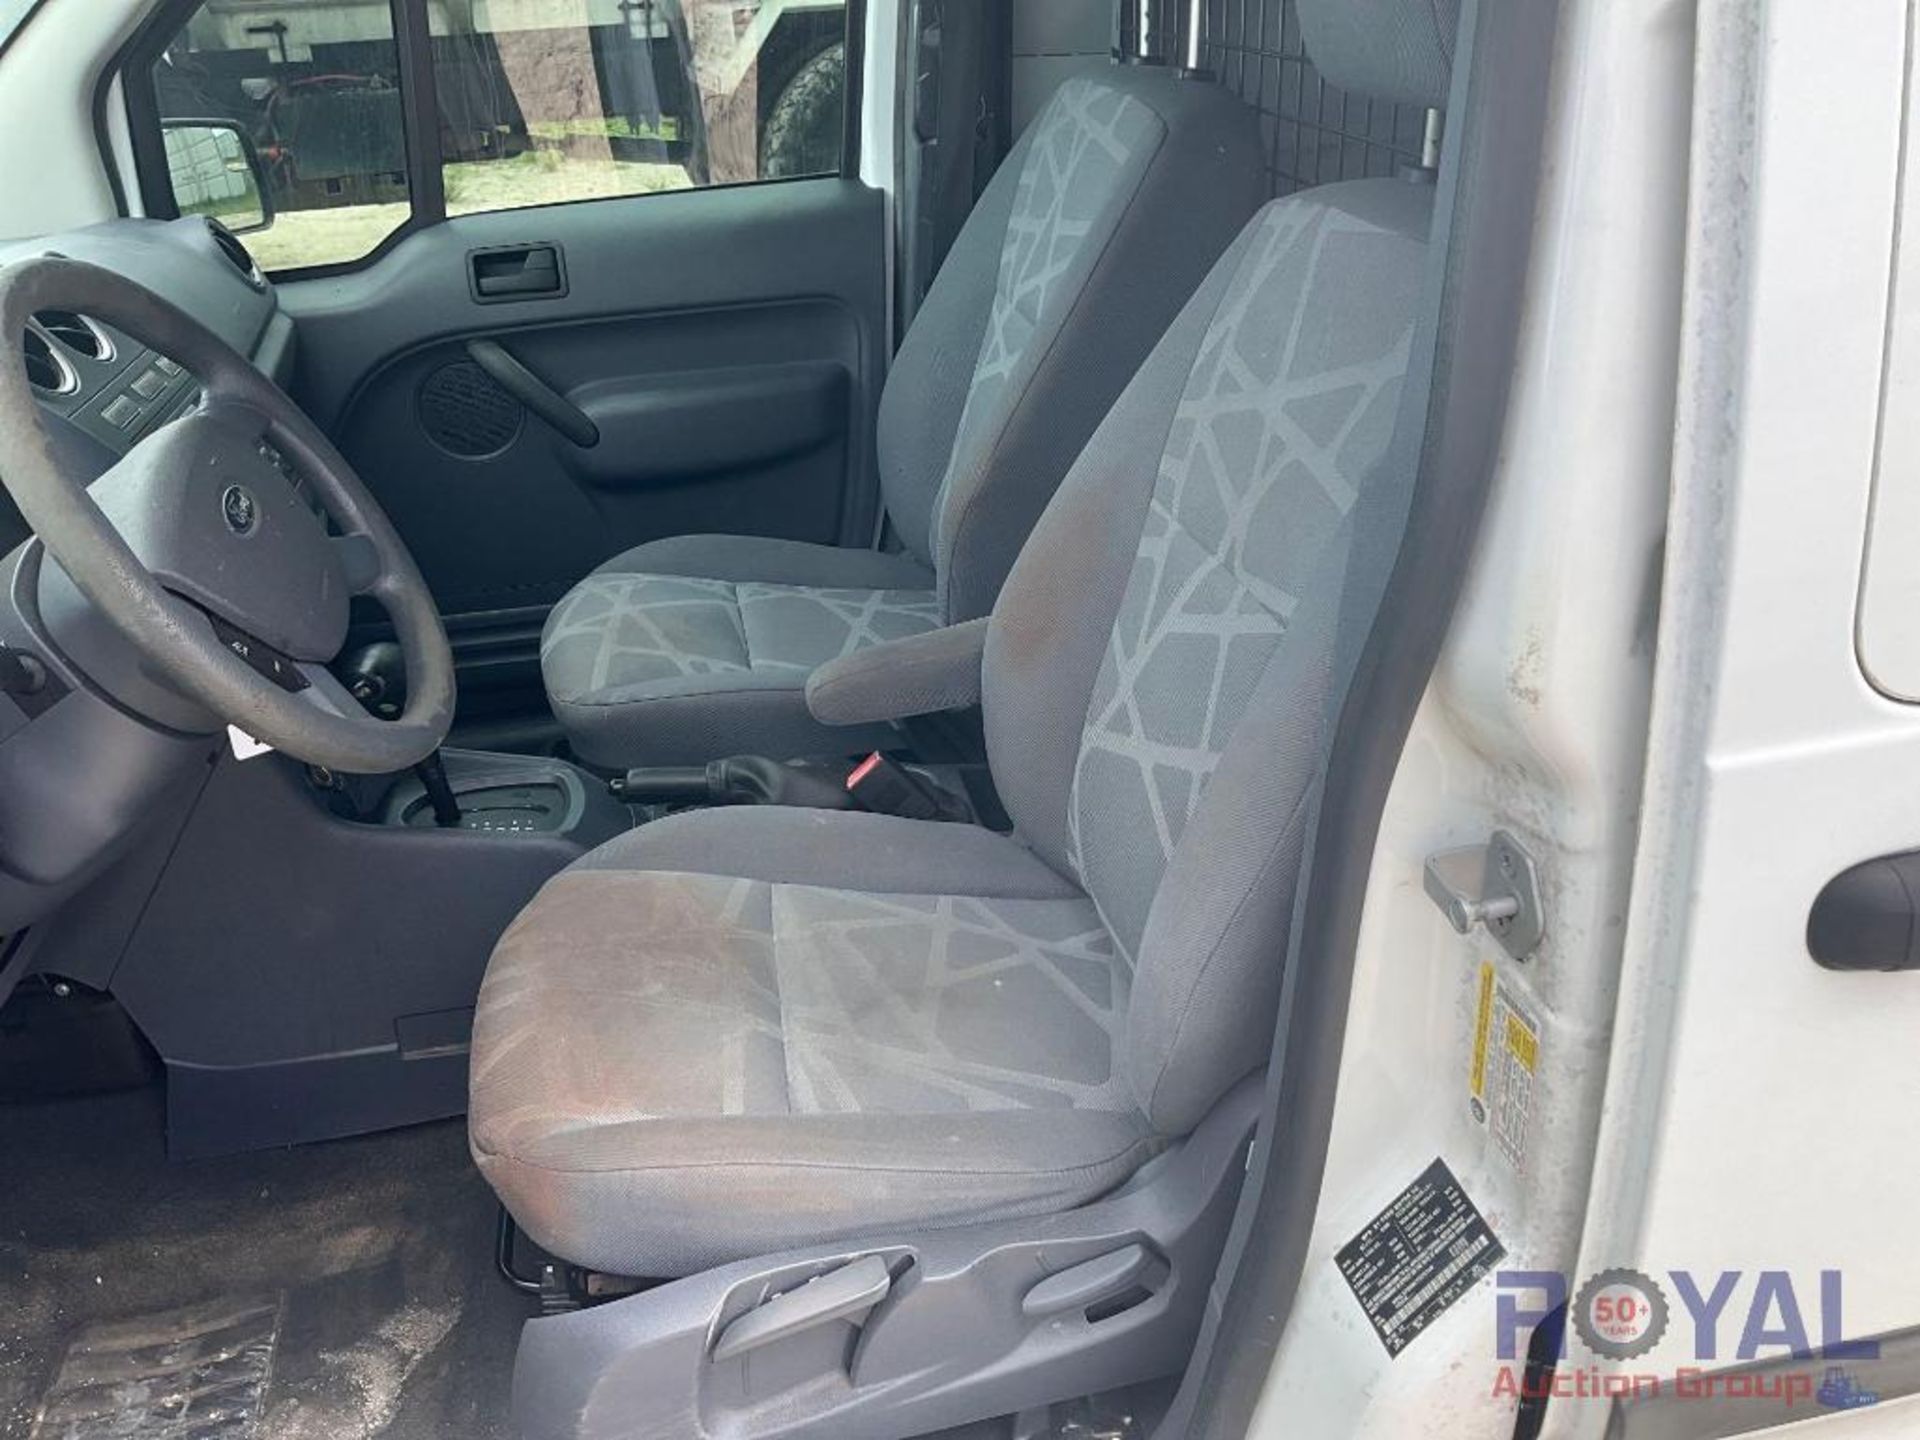 2012 Ford Transit Connect Van - Image 18 of 26